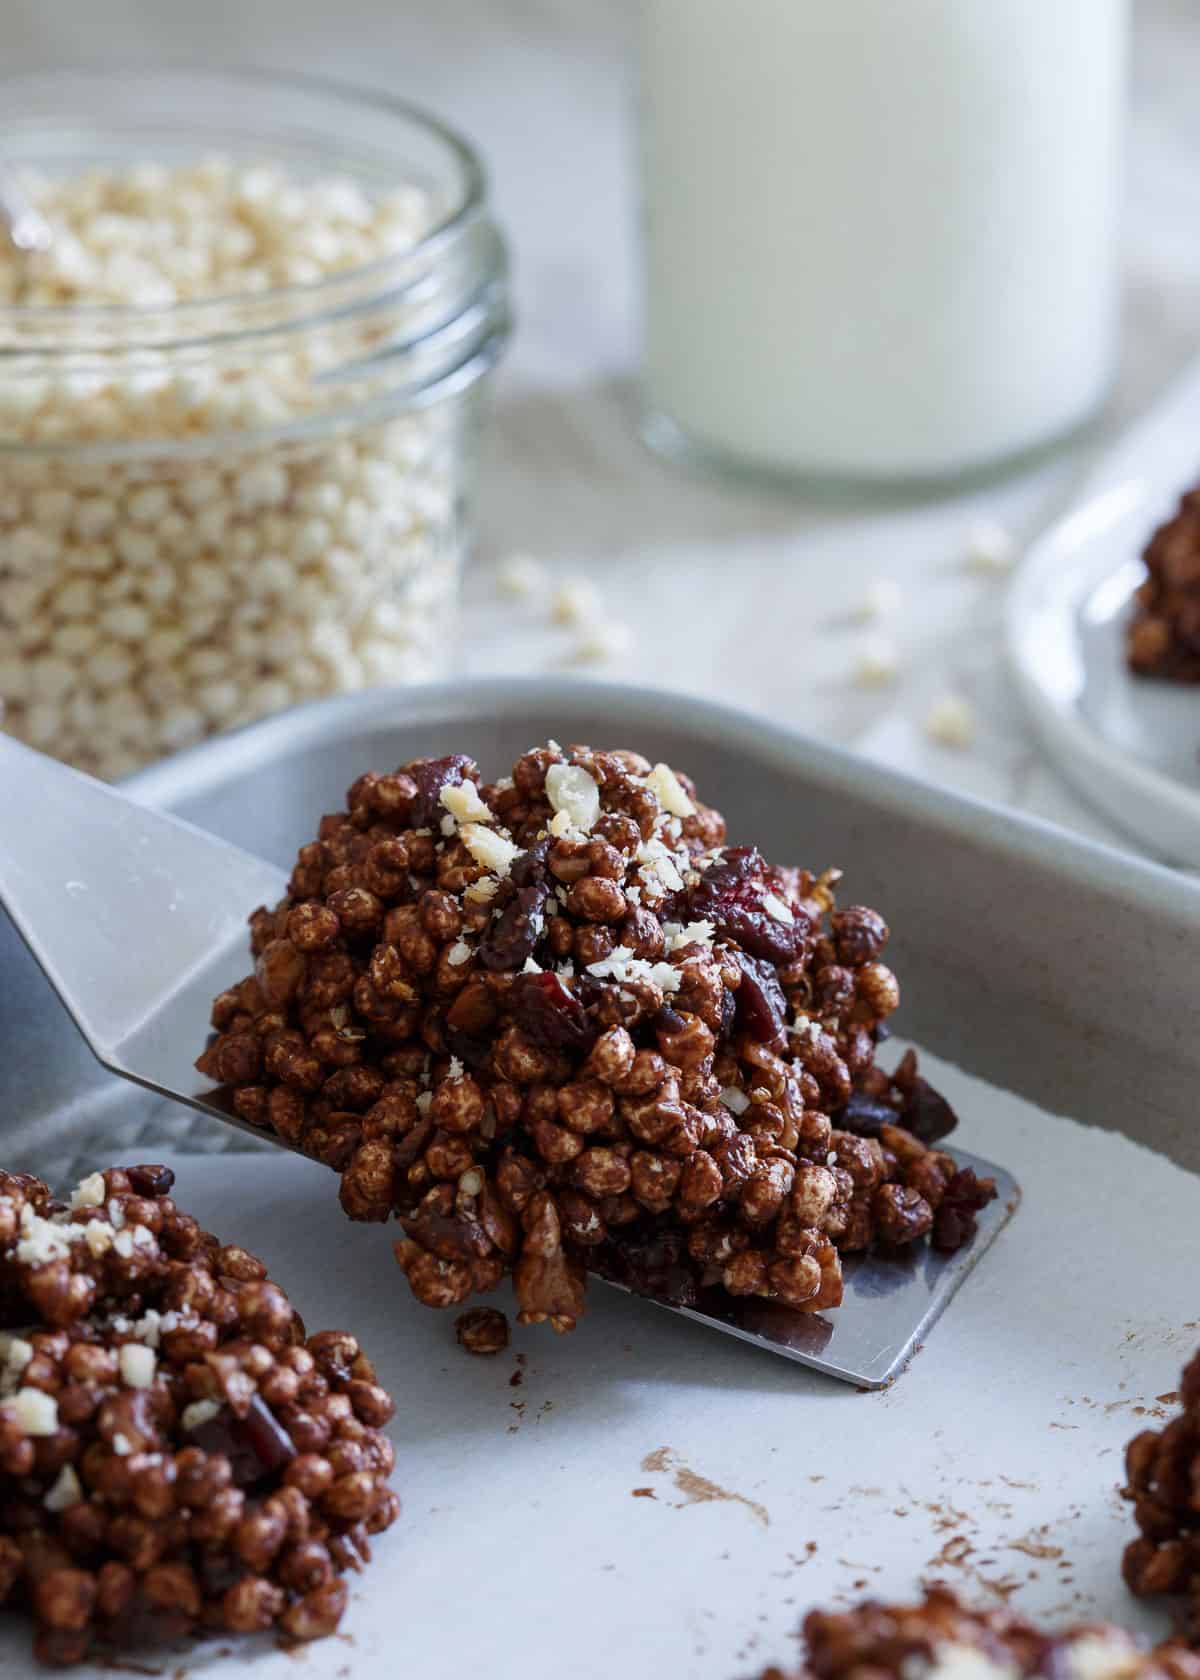 Chocolate Cranberry Puffed Millet Cookies are an easy gluten free no bake treat